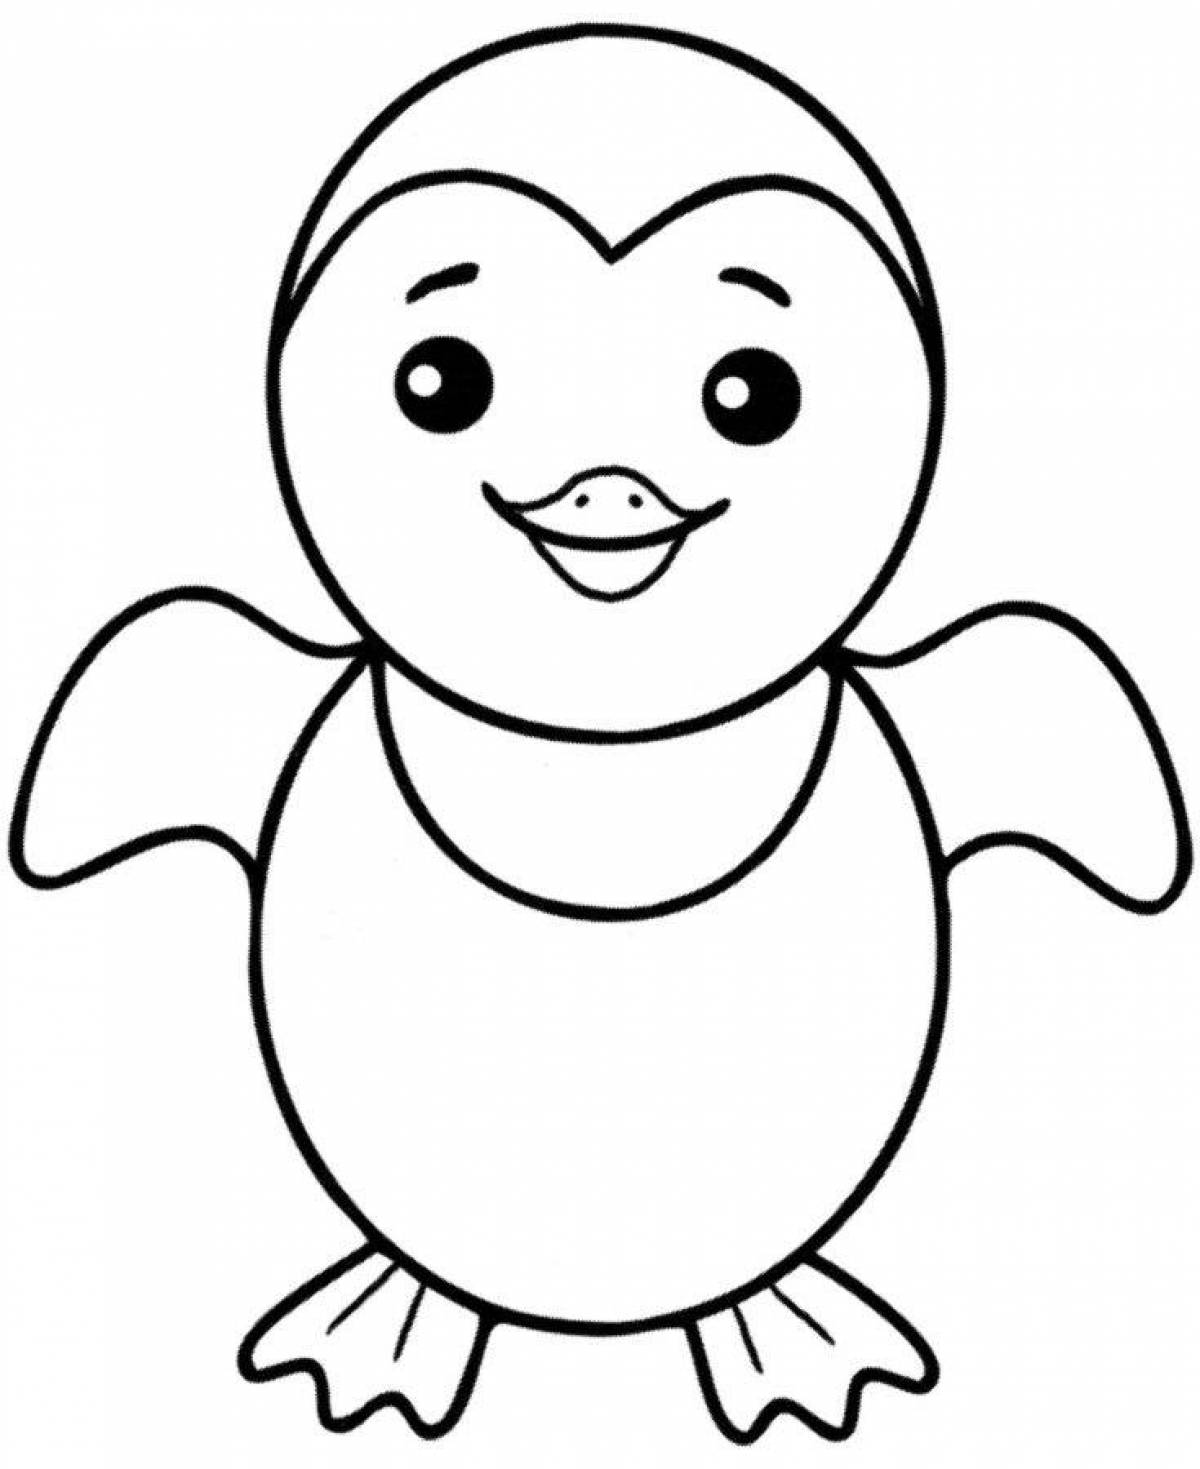 Glorious penguin coloring pages for kids